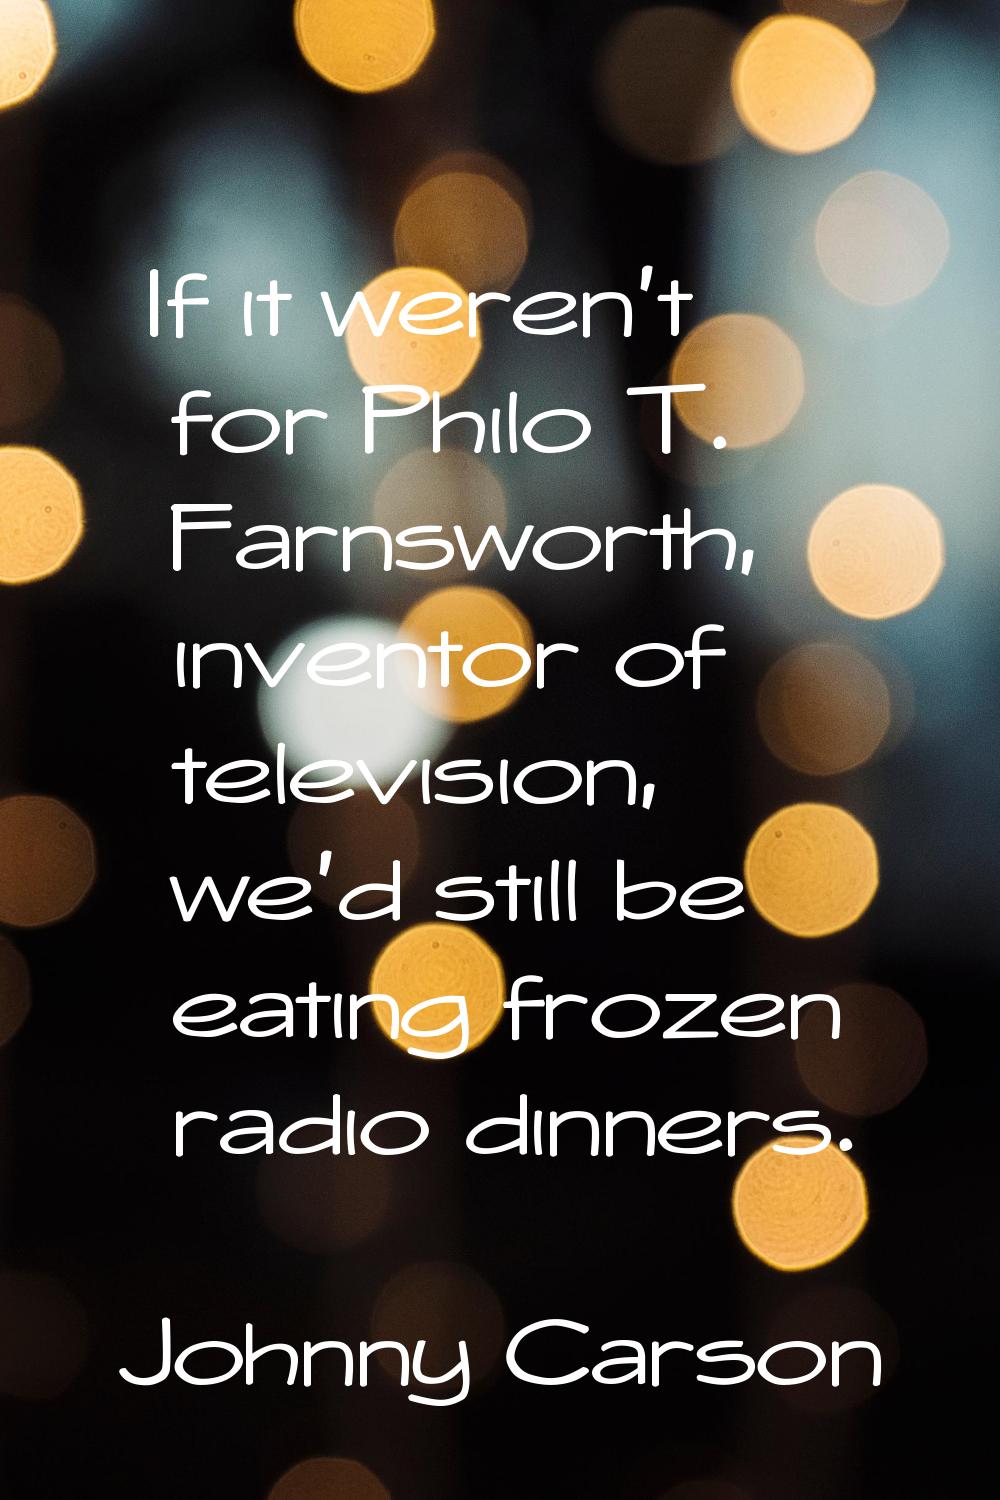 If it weren't for Philo T. Farnsworth, inventor of television, we'd still be eating frozen radio di